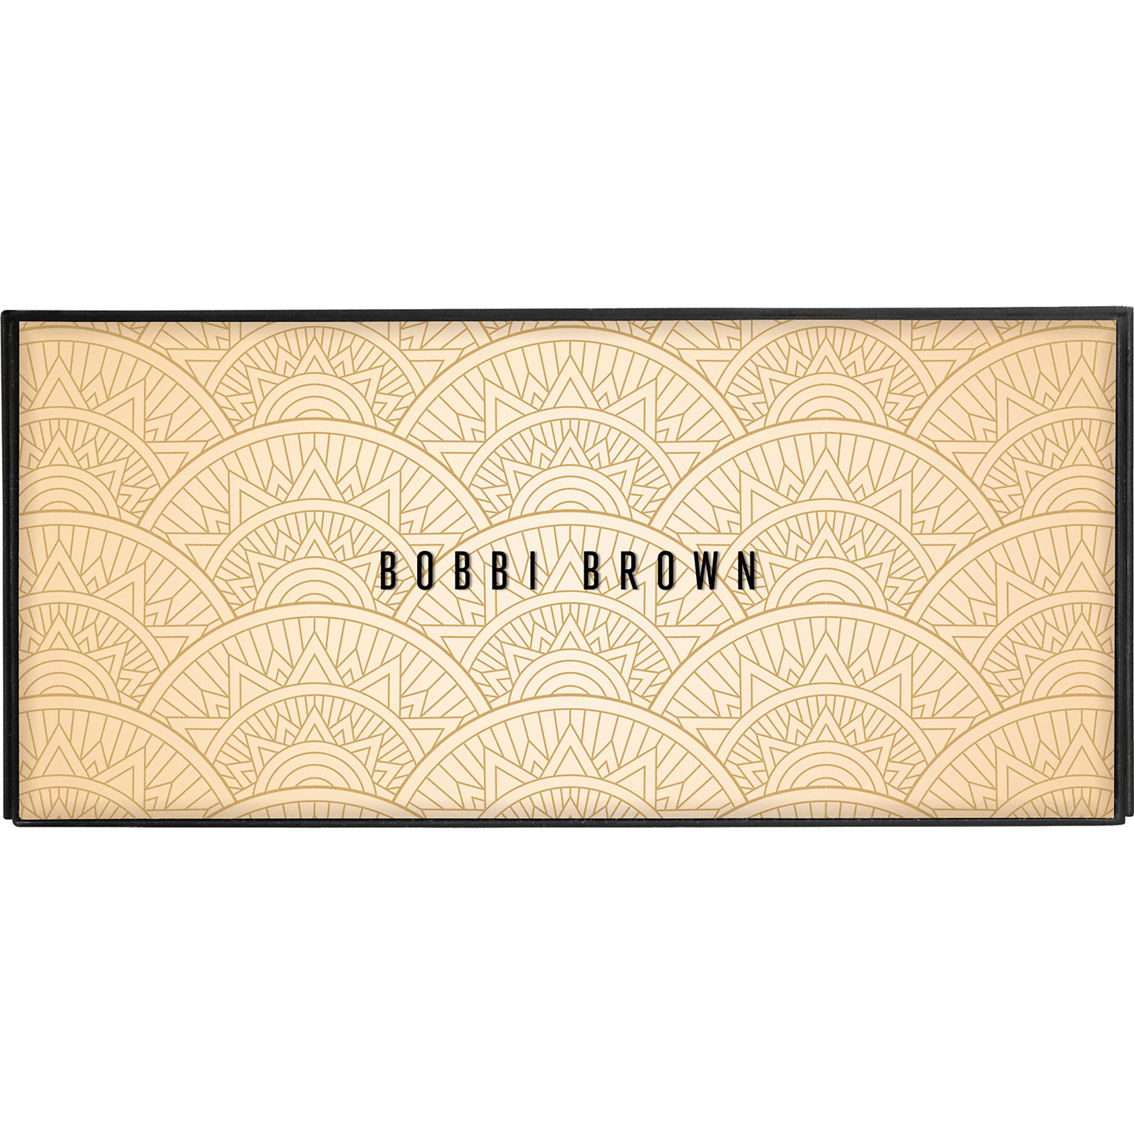 Bobbi Brown Glimmering Glamour 12 Well Holiday Eyeshadow Palette